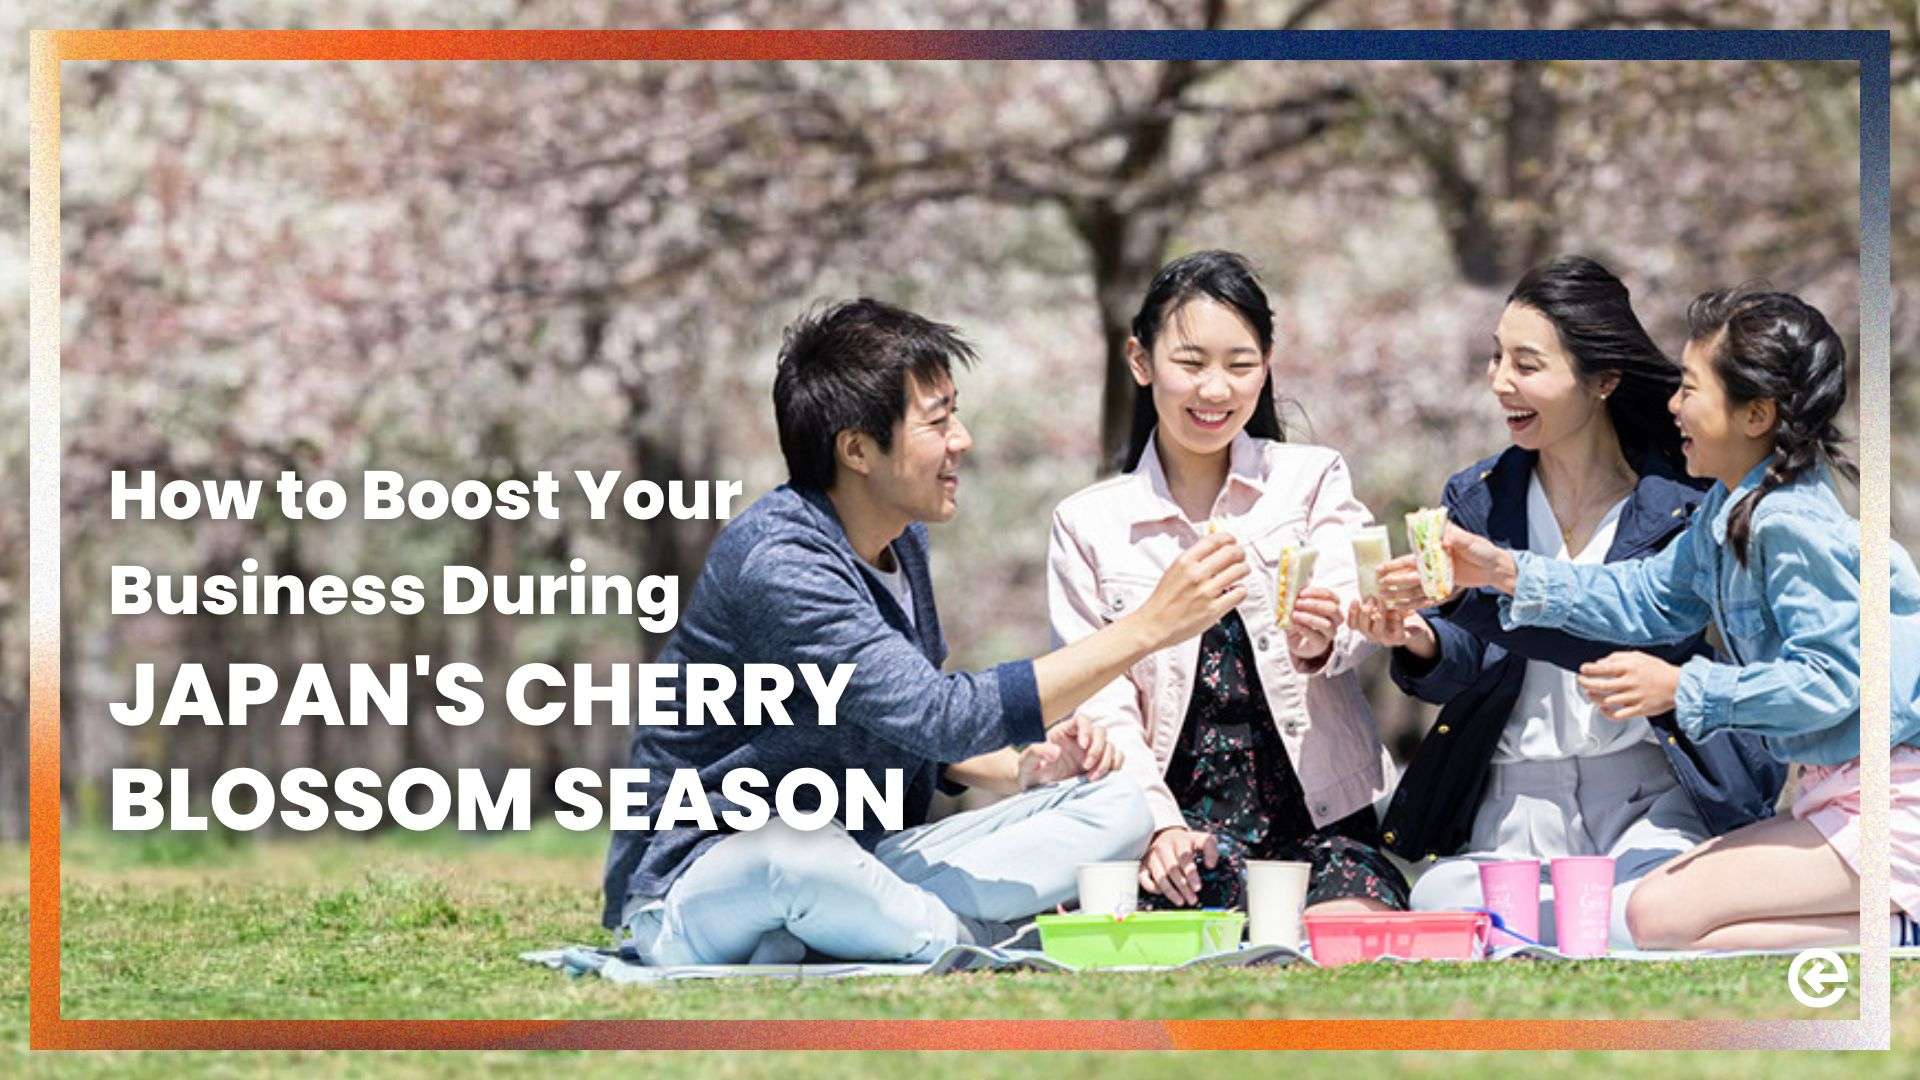 How to Boost Your Business during Japan's Cherry Blossom Season